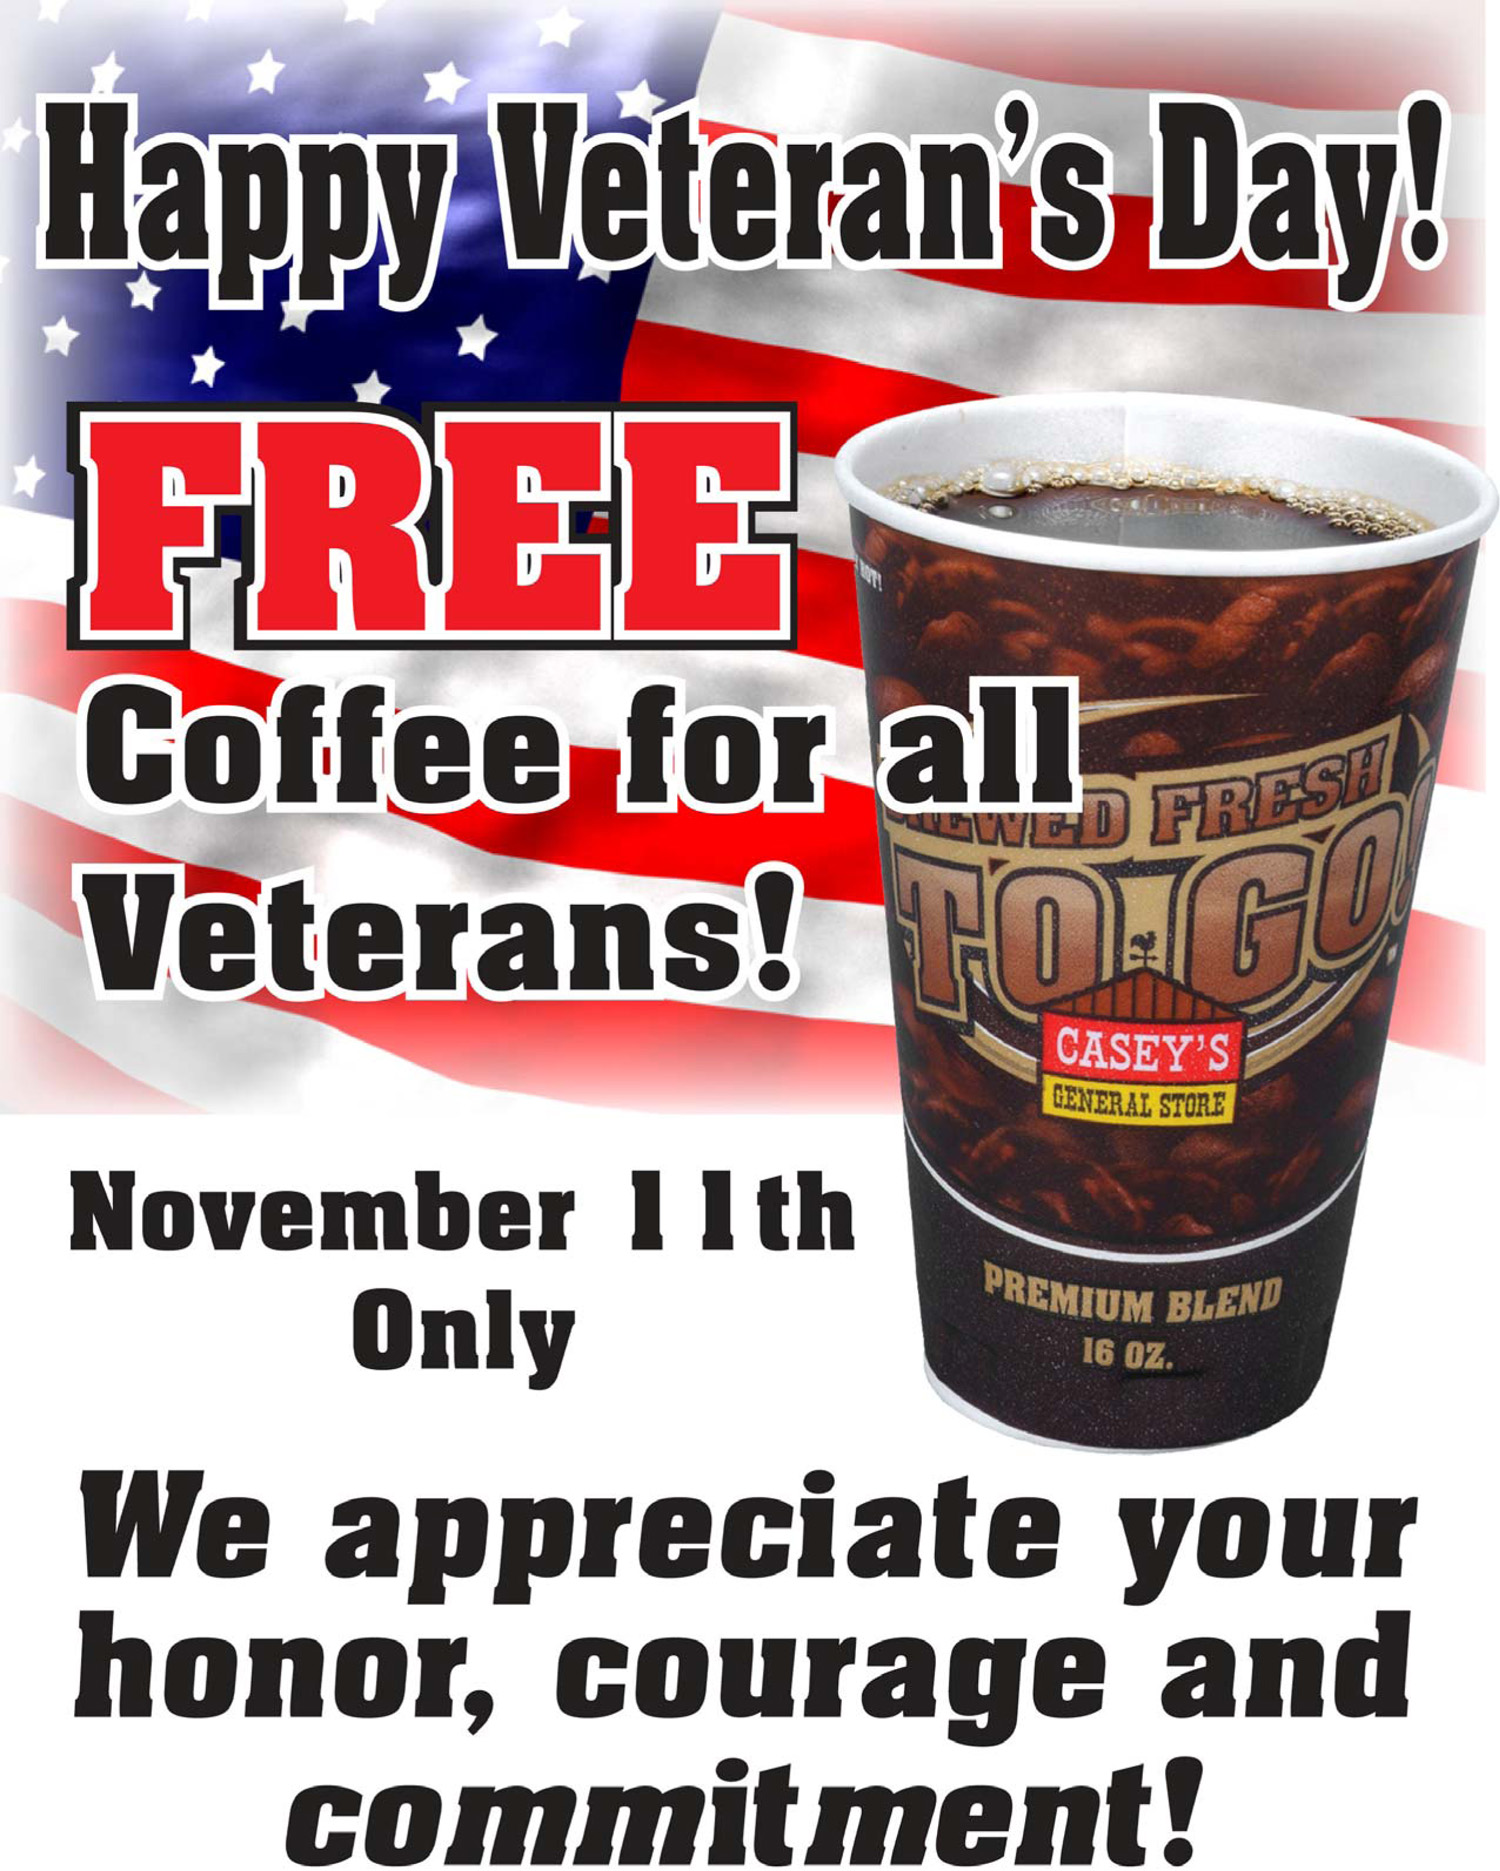 Casey's General Store Free Coffee for Veterans Tomorrow 11/11 Frugal